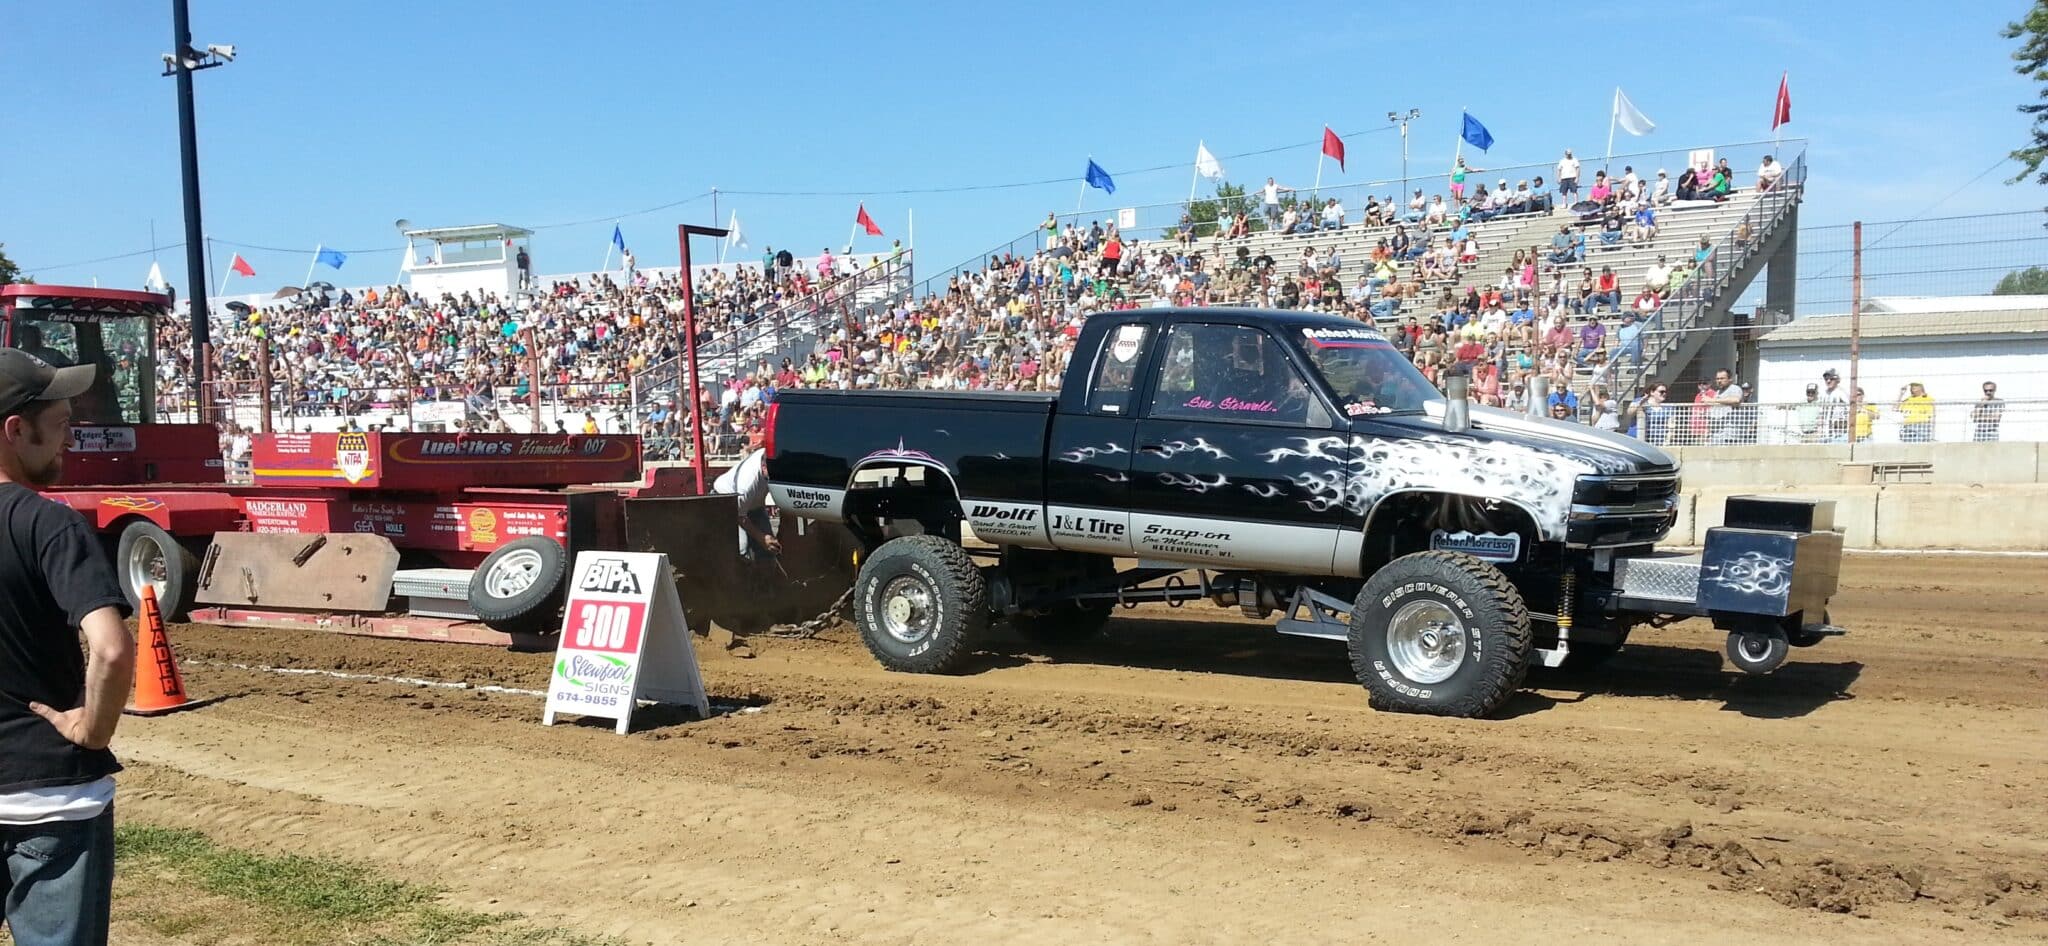 4WD Truck Pull at the Dodge County Fair